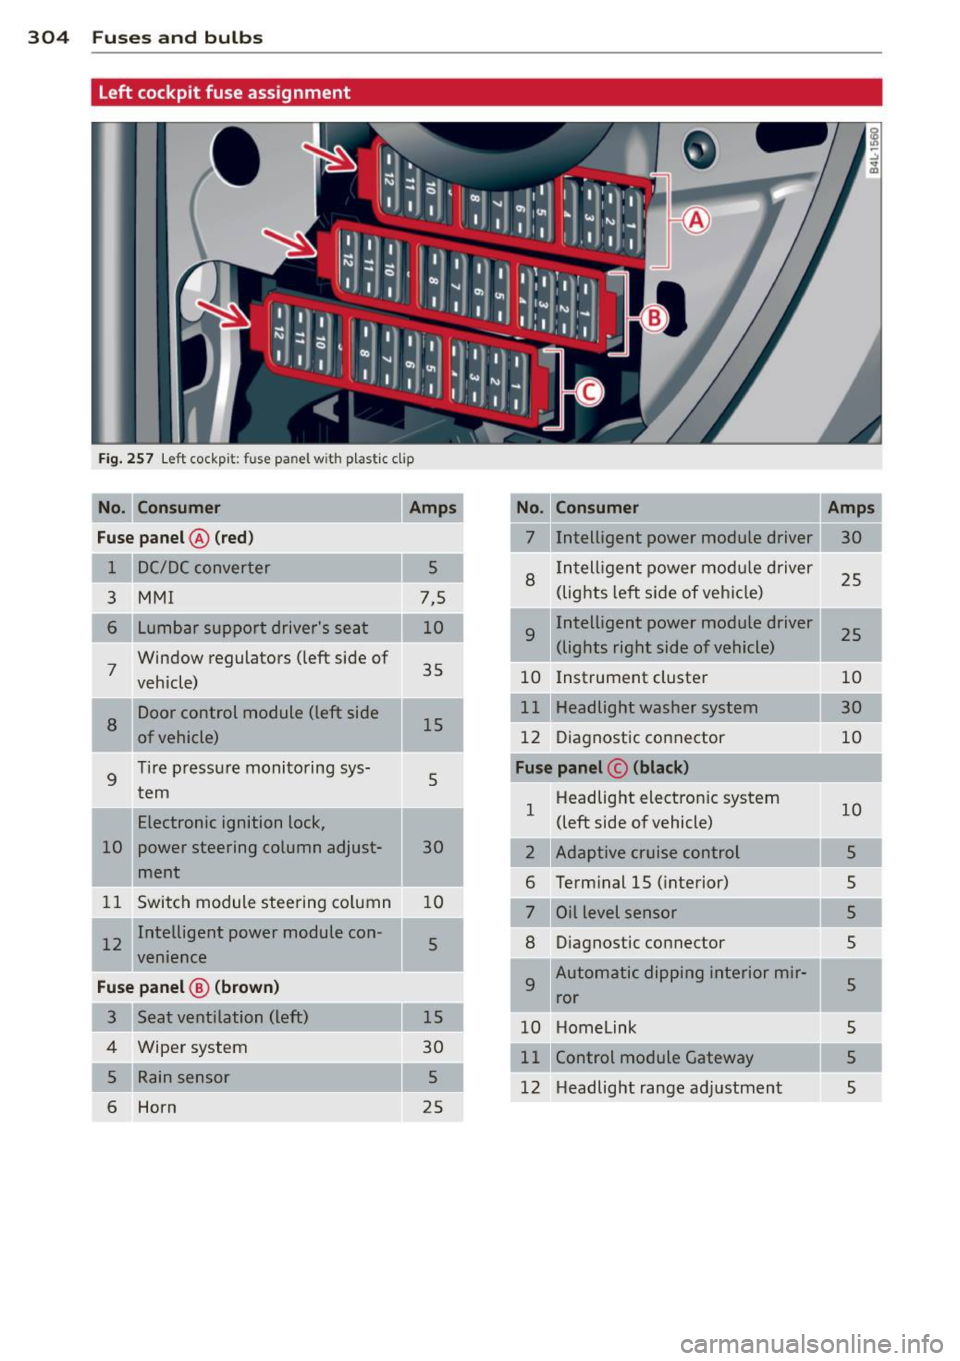 AUDI Q7 2012  Owner´s Manual 304  Fuses and  bulb s 
. 
Left cockpit  fuse  assignment 
Fig. 257  Left  cockpi t:  fu se  pa nel w ith plas tic cl ip 
Fu se pa nel @  (red ) 
1 
3  MMI 
6 
7 
8 
9  Lumbar  support  drivers  seat